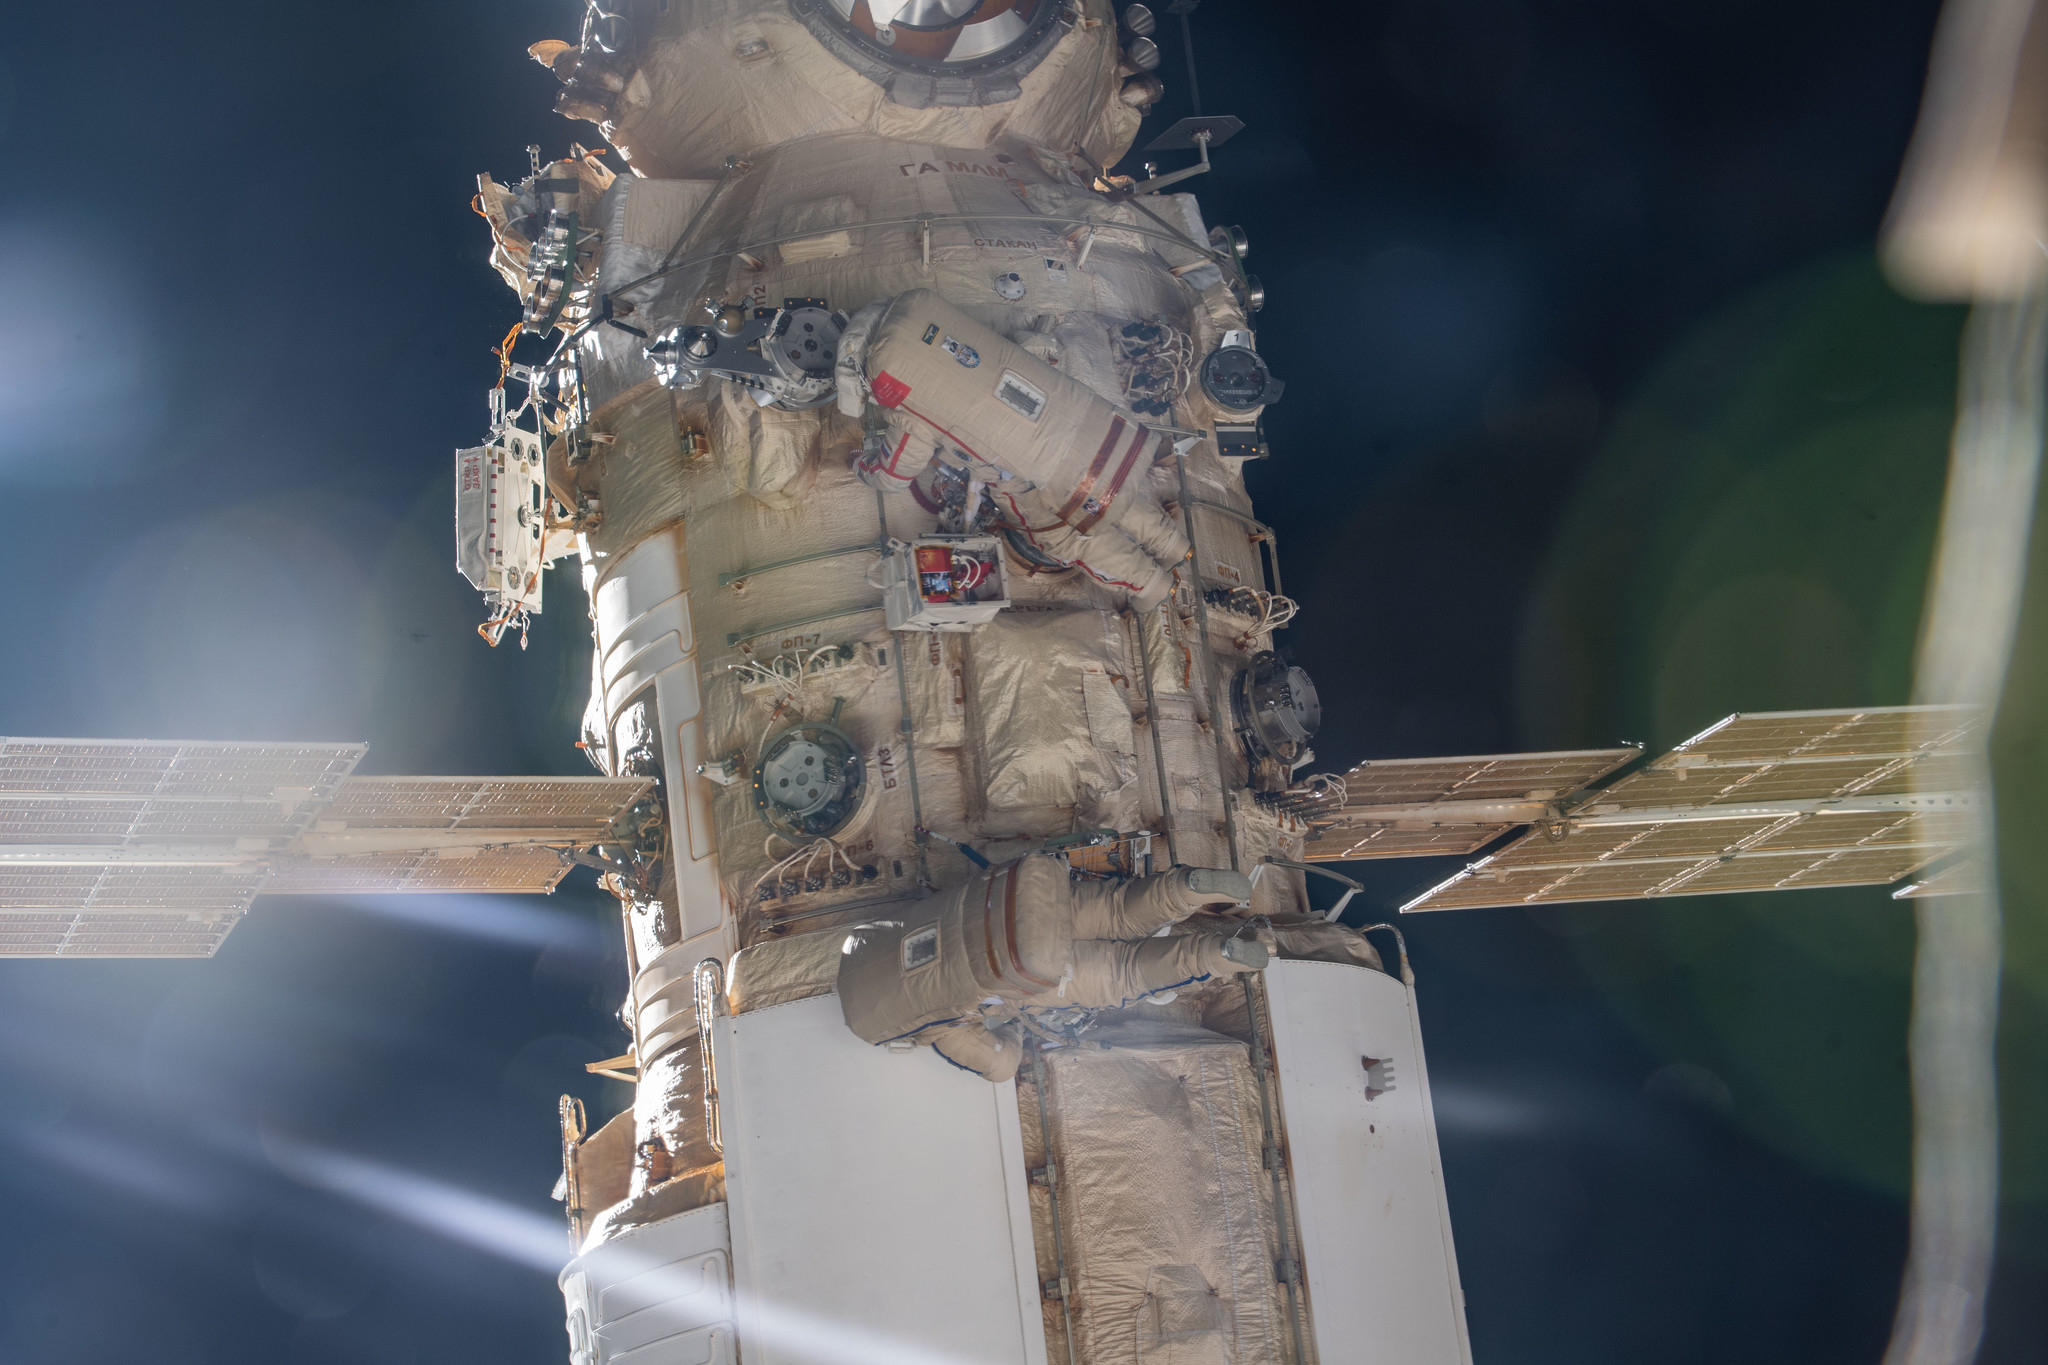 Roscosmos cosmonauts Oleg Artemyev and Denis Matveev are pictured on April 28, 2022, attached to the Nauka multipurpose laboratory module during a seven-hour and 42-minute spacewalk to activate the European robotic arm on the International Space Station.